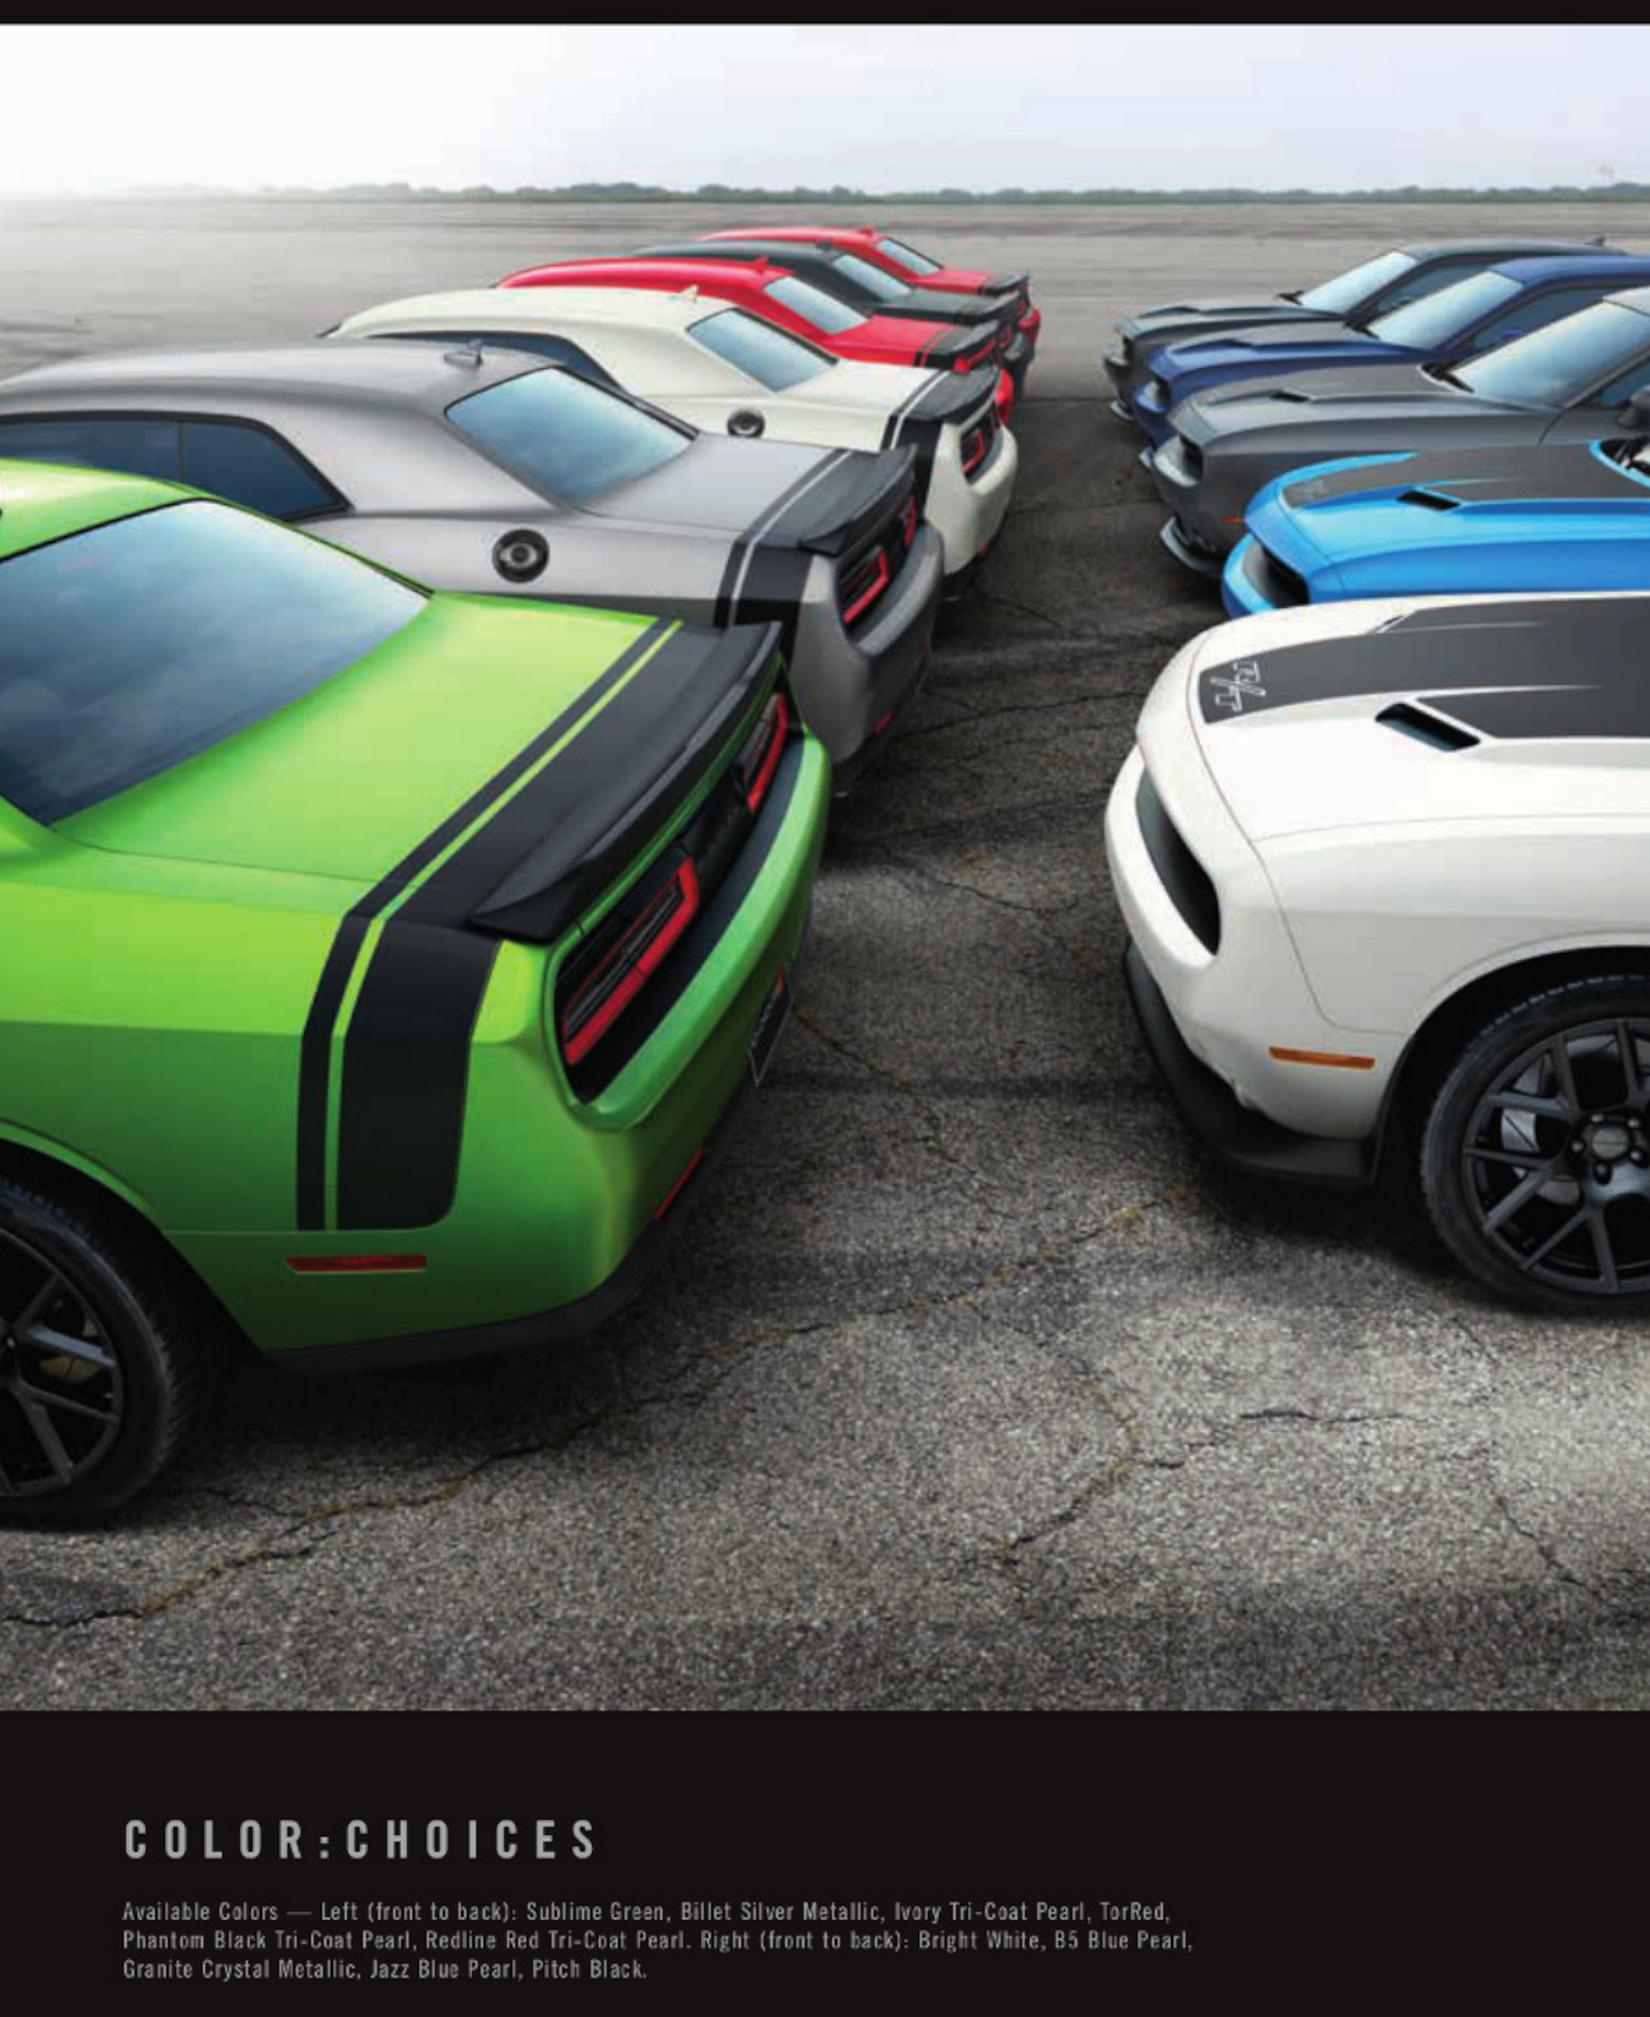 2015 Dodge Challenger color choices